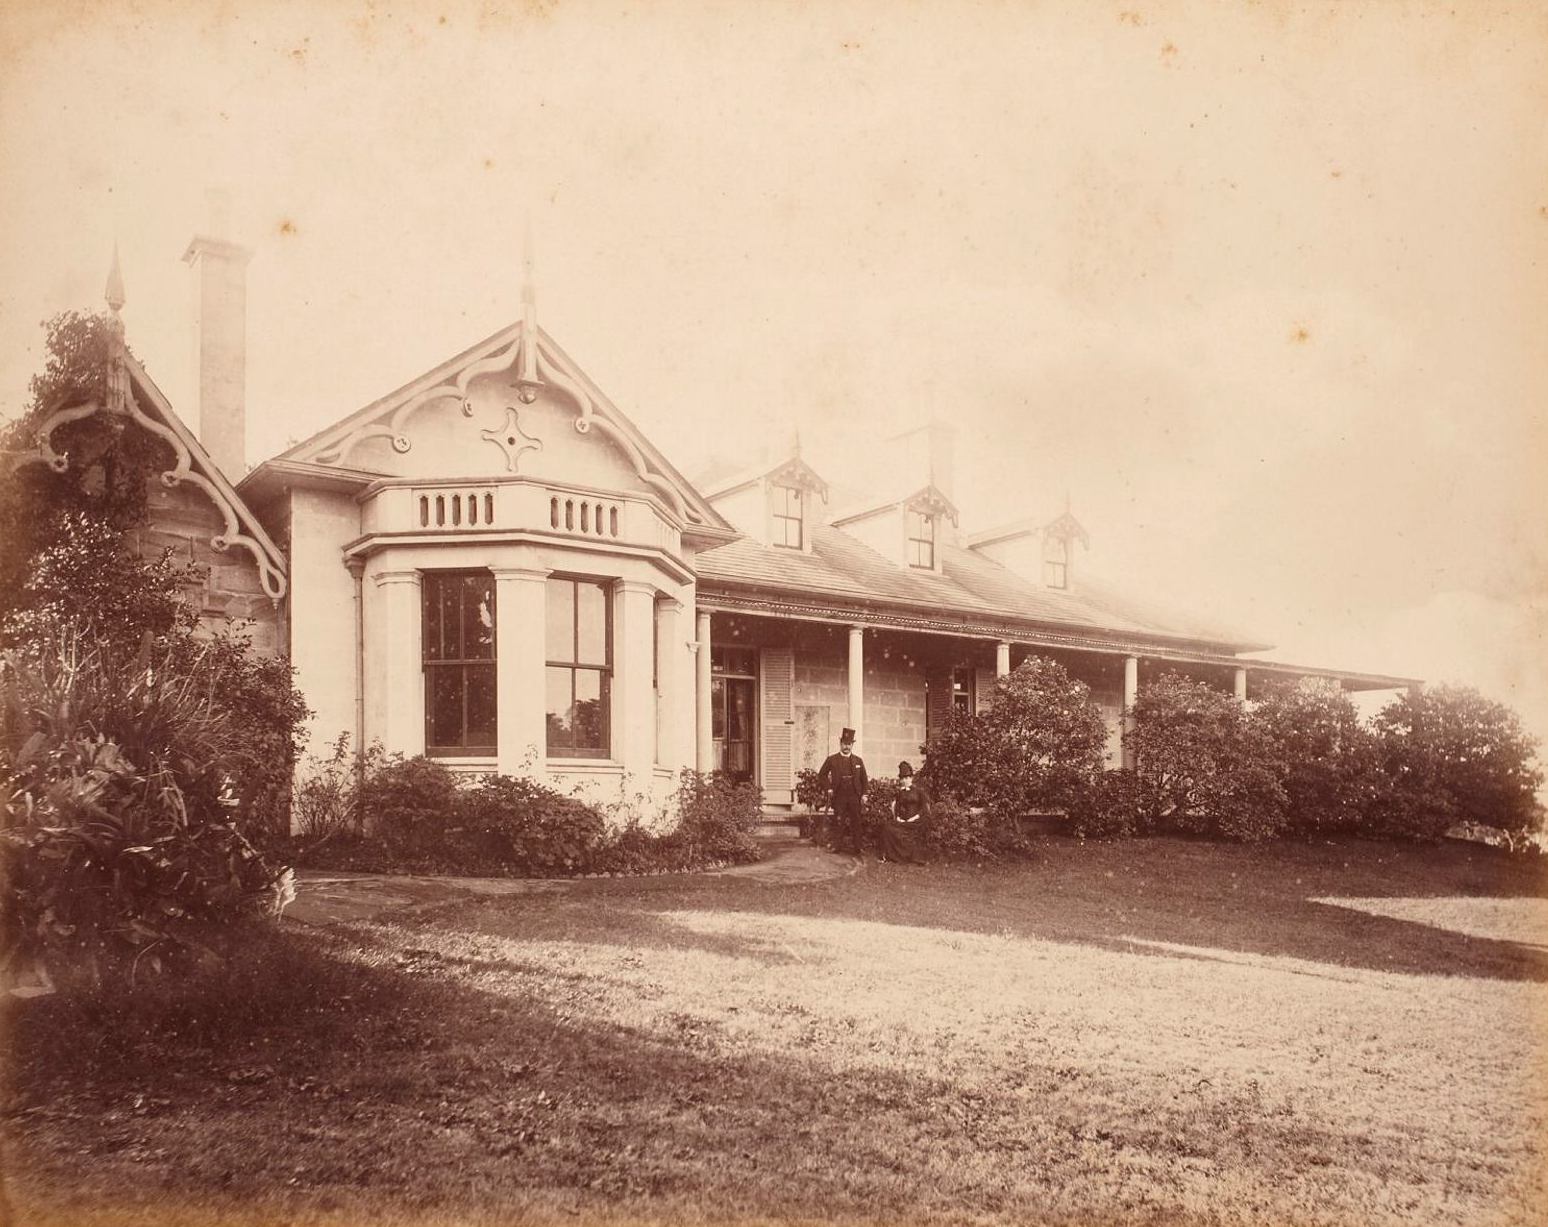 By dining room bay window Clifton, Kirribilli Point, around 1888 / photographer unknown